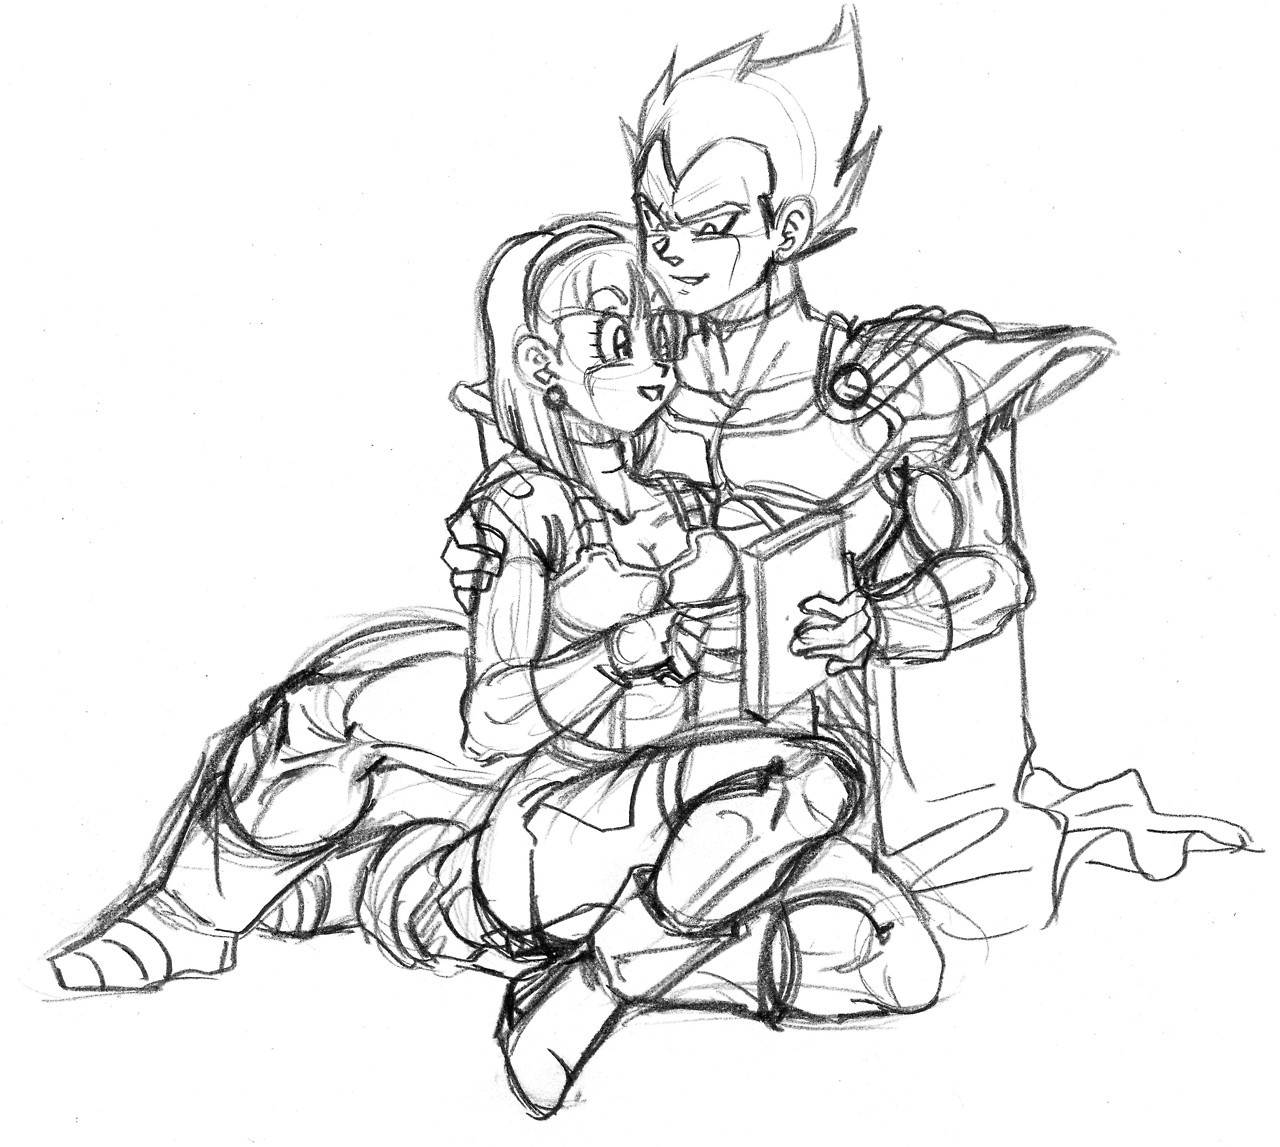 saiyanb: Still just doodling, and very rough ones at that sorry. (Family was in town